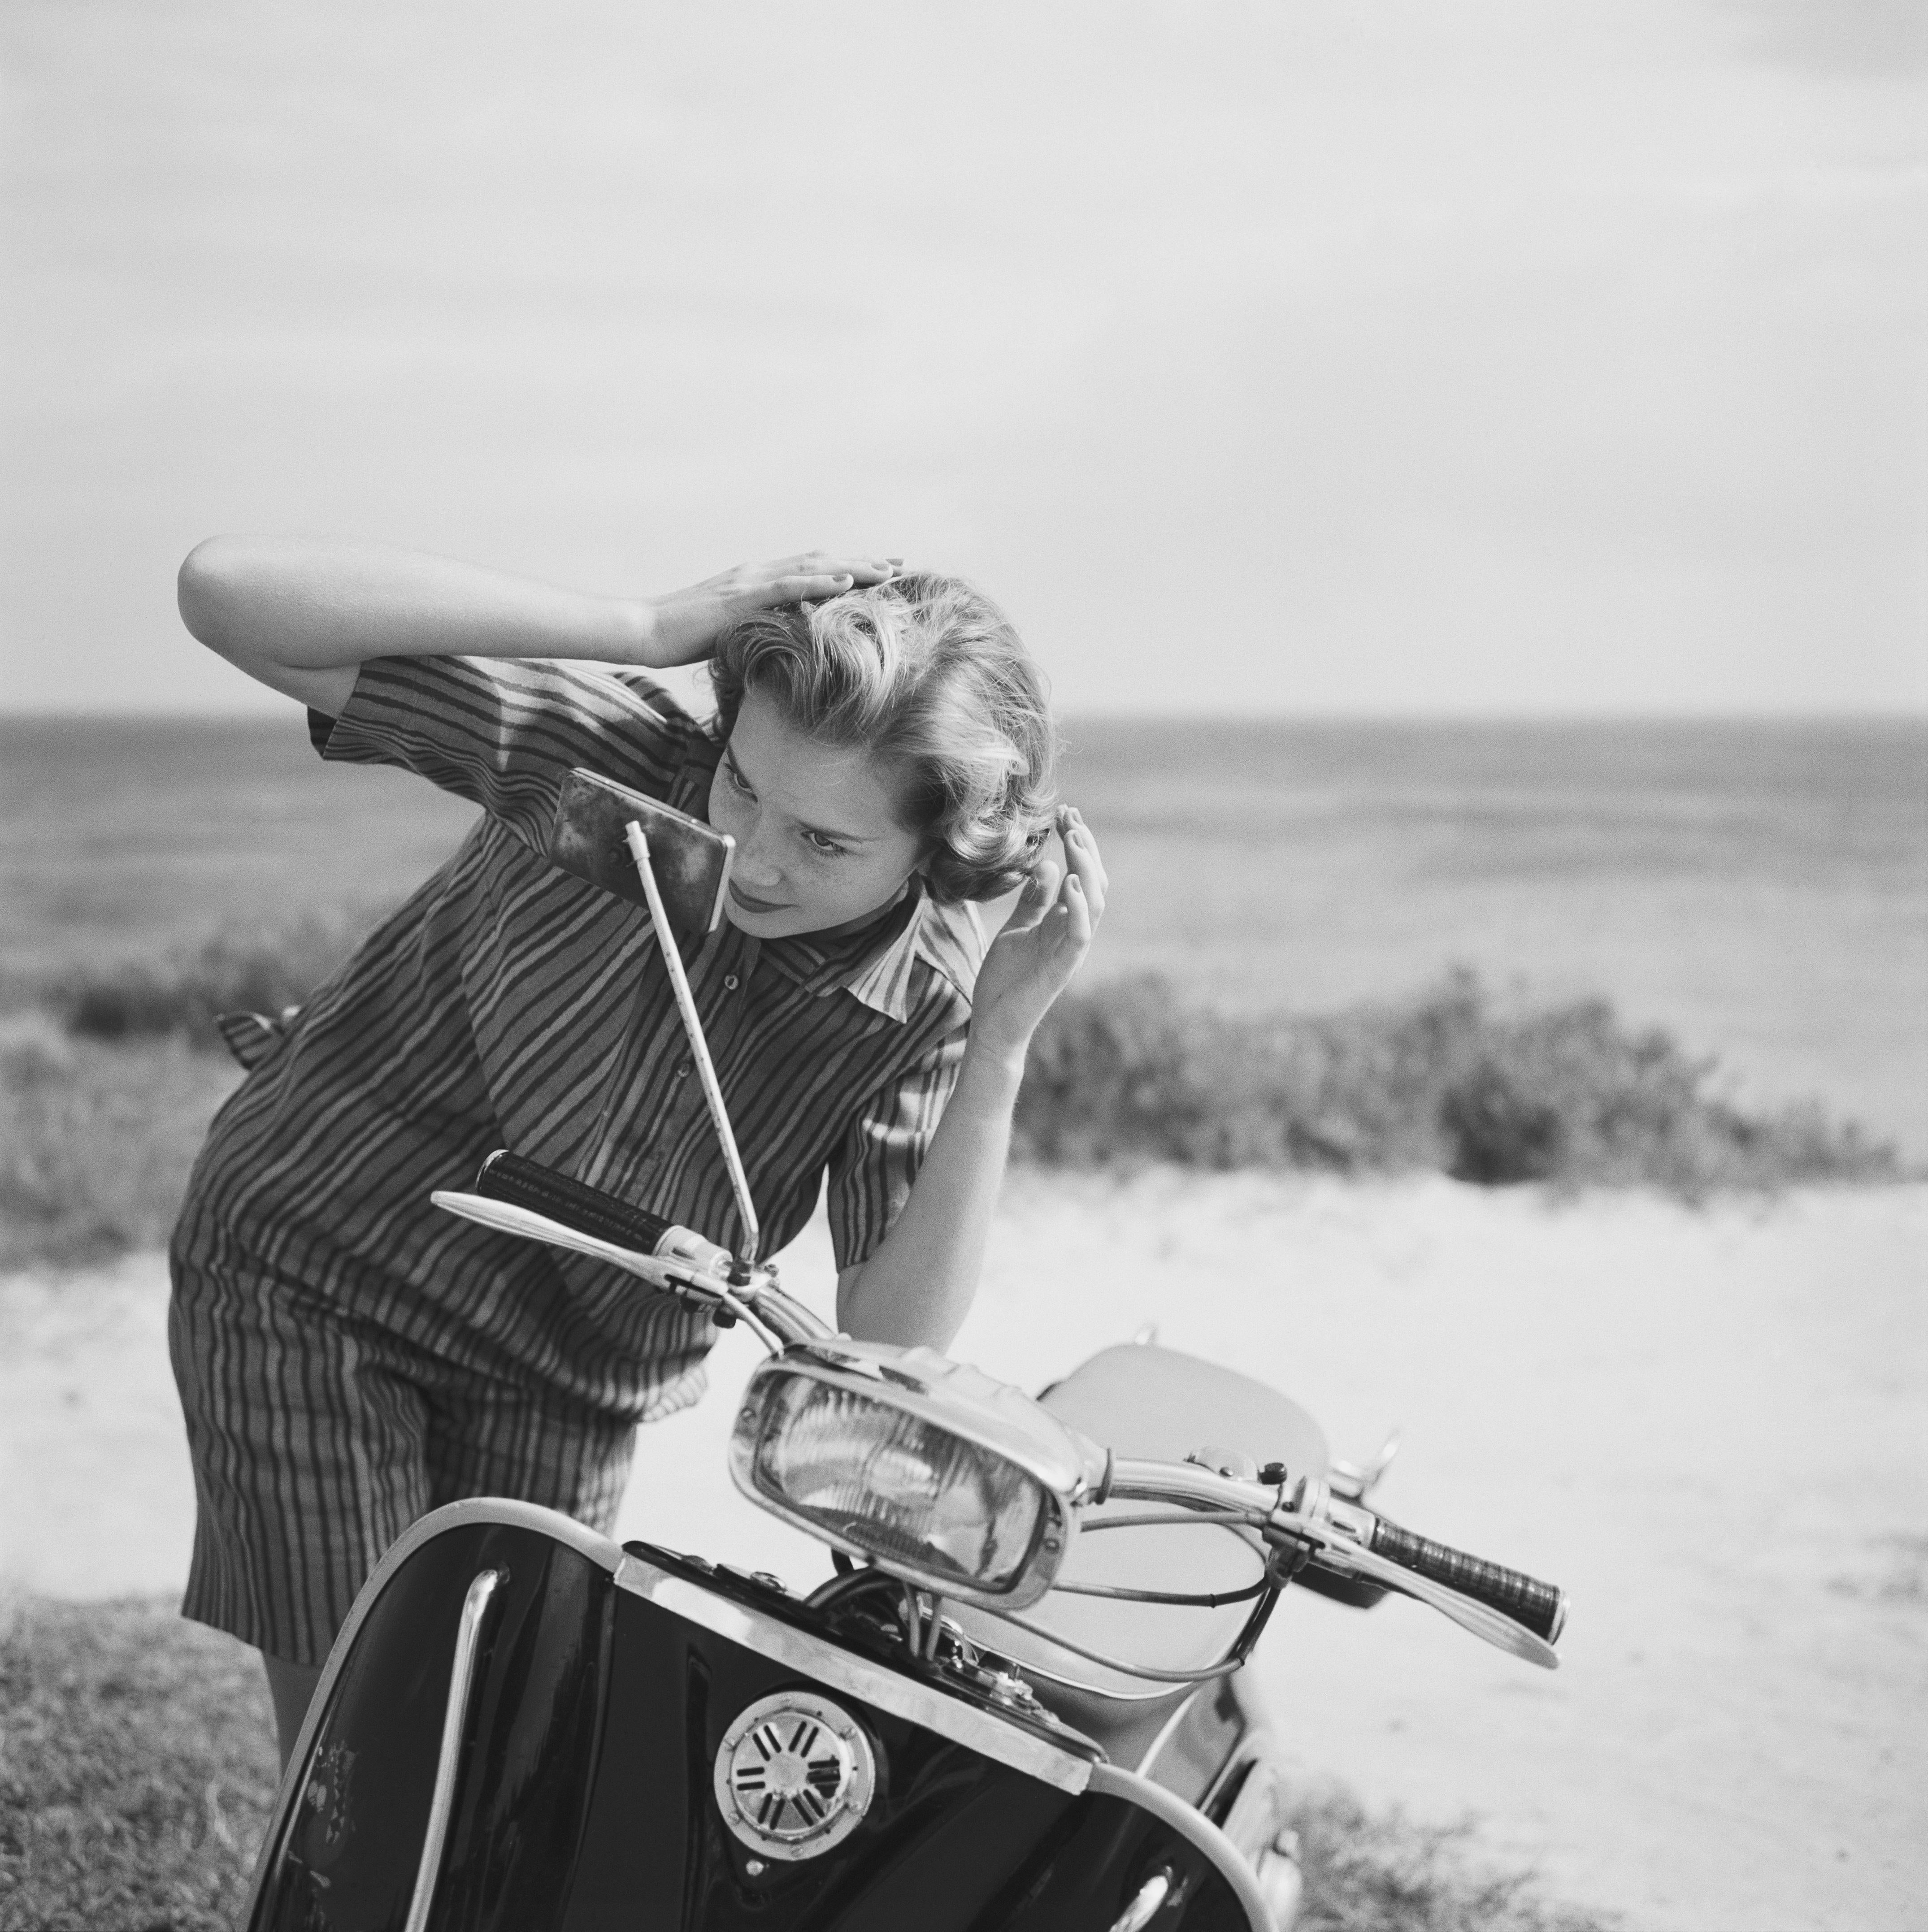 Faith Gibbons checks her hair in the mirror of a motor scooter, Bermuda, 1958. She is wearing a striped Irish linen overblouse by Donald Davies of Dublin.

Once a year, we uncover never-before-seen Slim Aarons images! This is one of fifteen from our